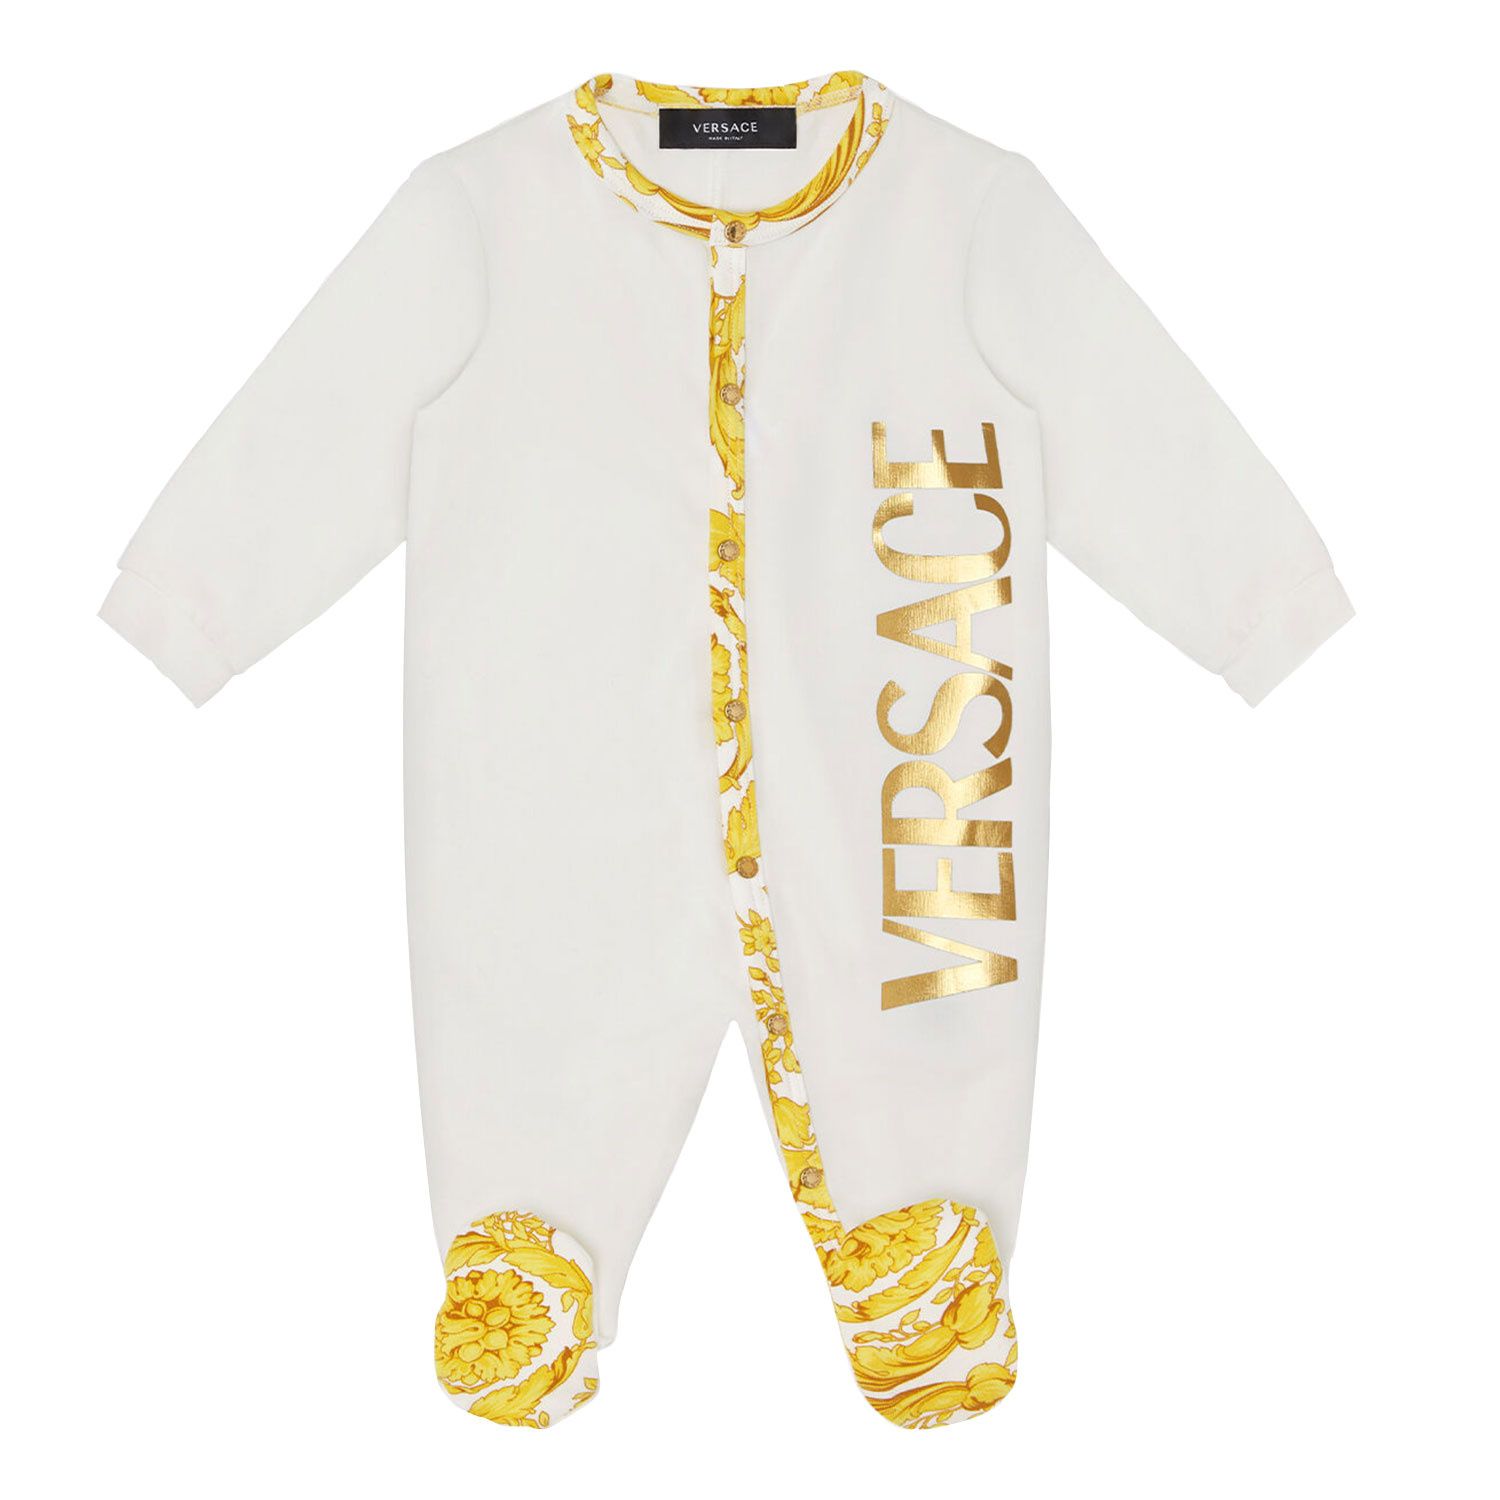 Picture of Versace 1001585 1A02409 baby playsuit white